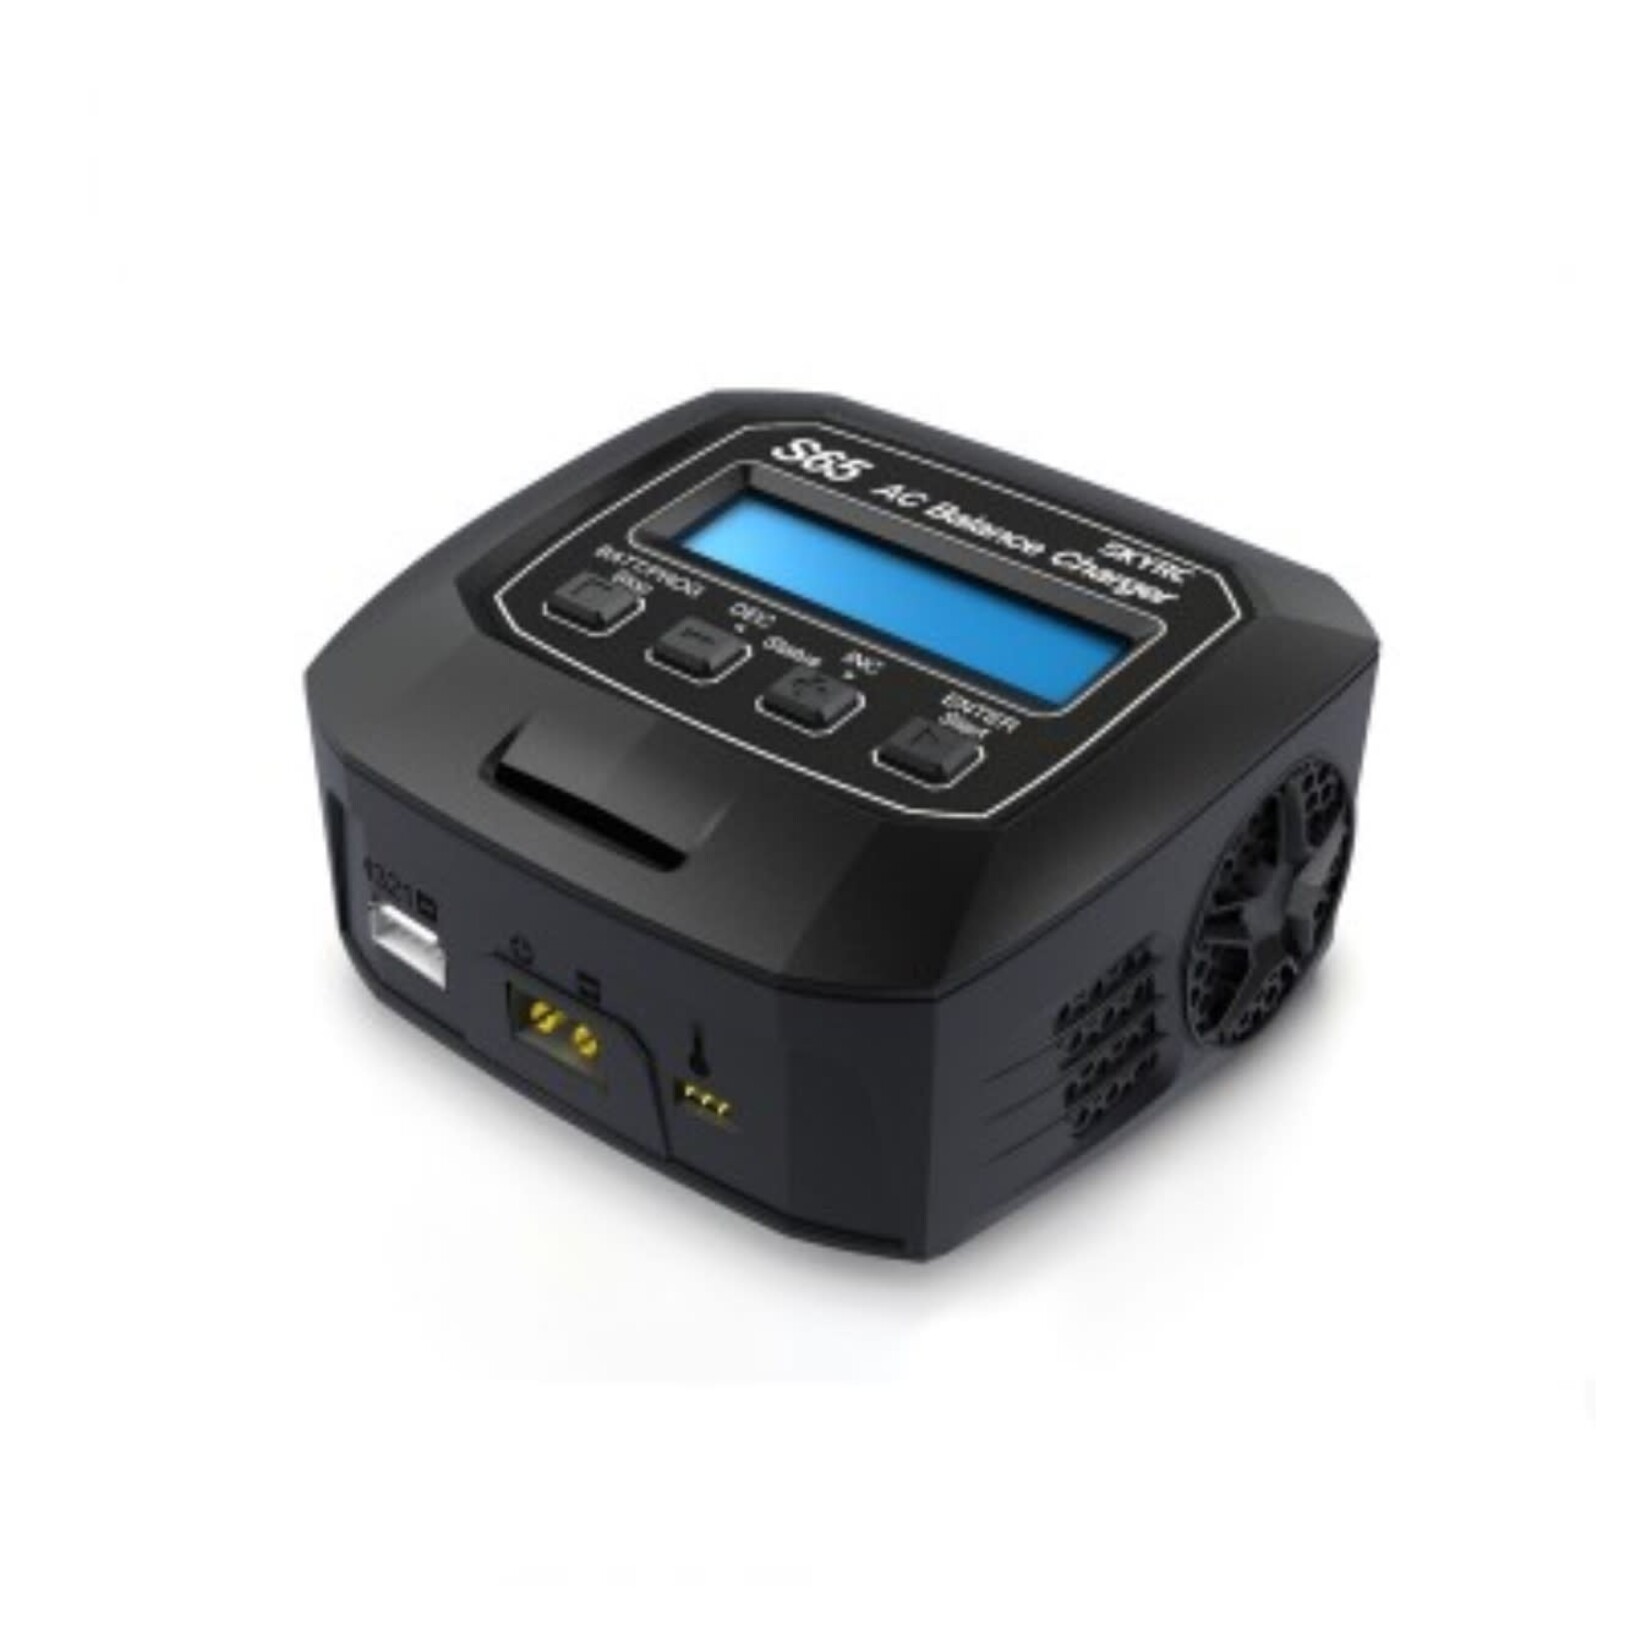 Skyrc S65 AC Balance Charger / Discharger 65W, 6A